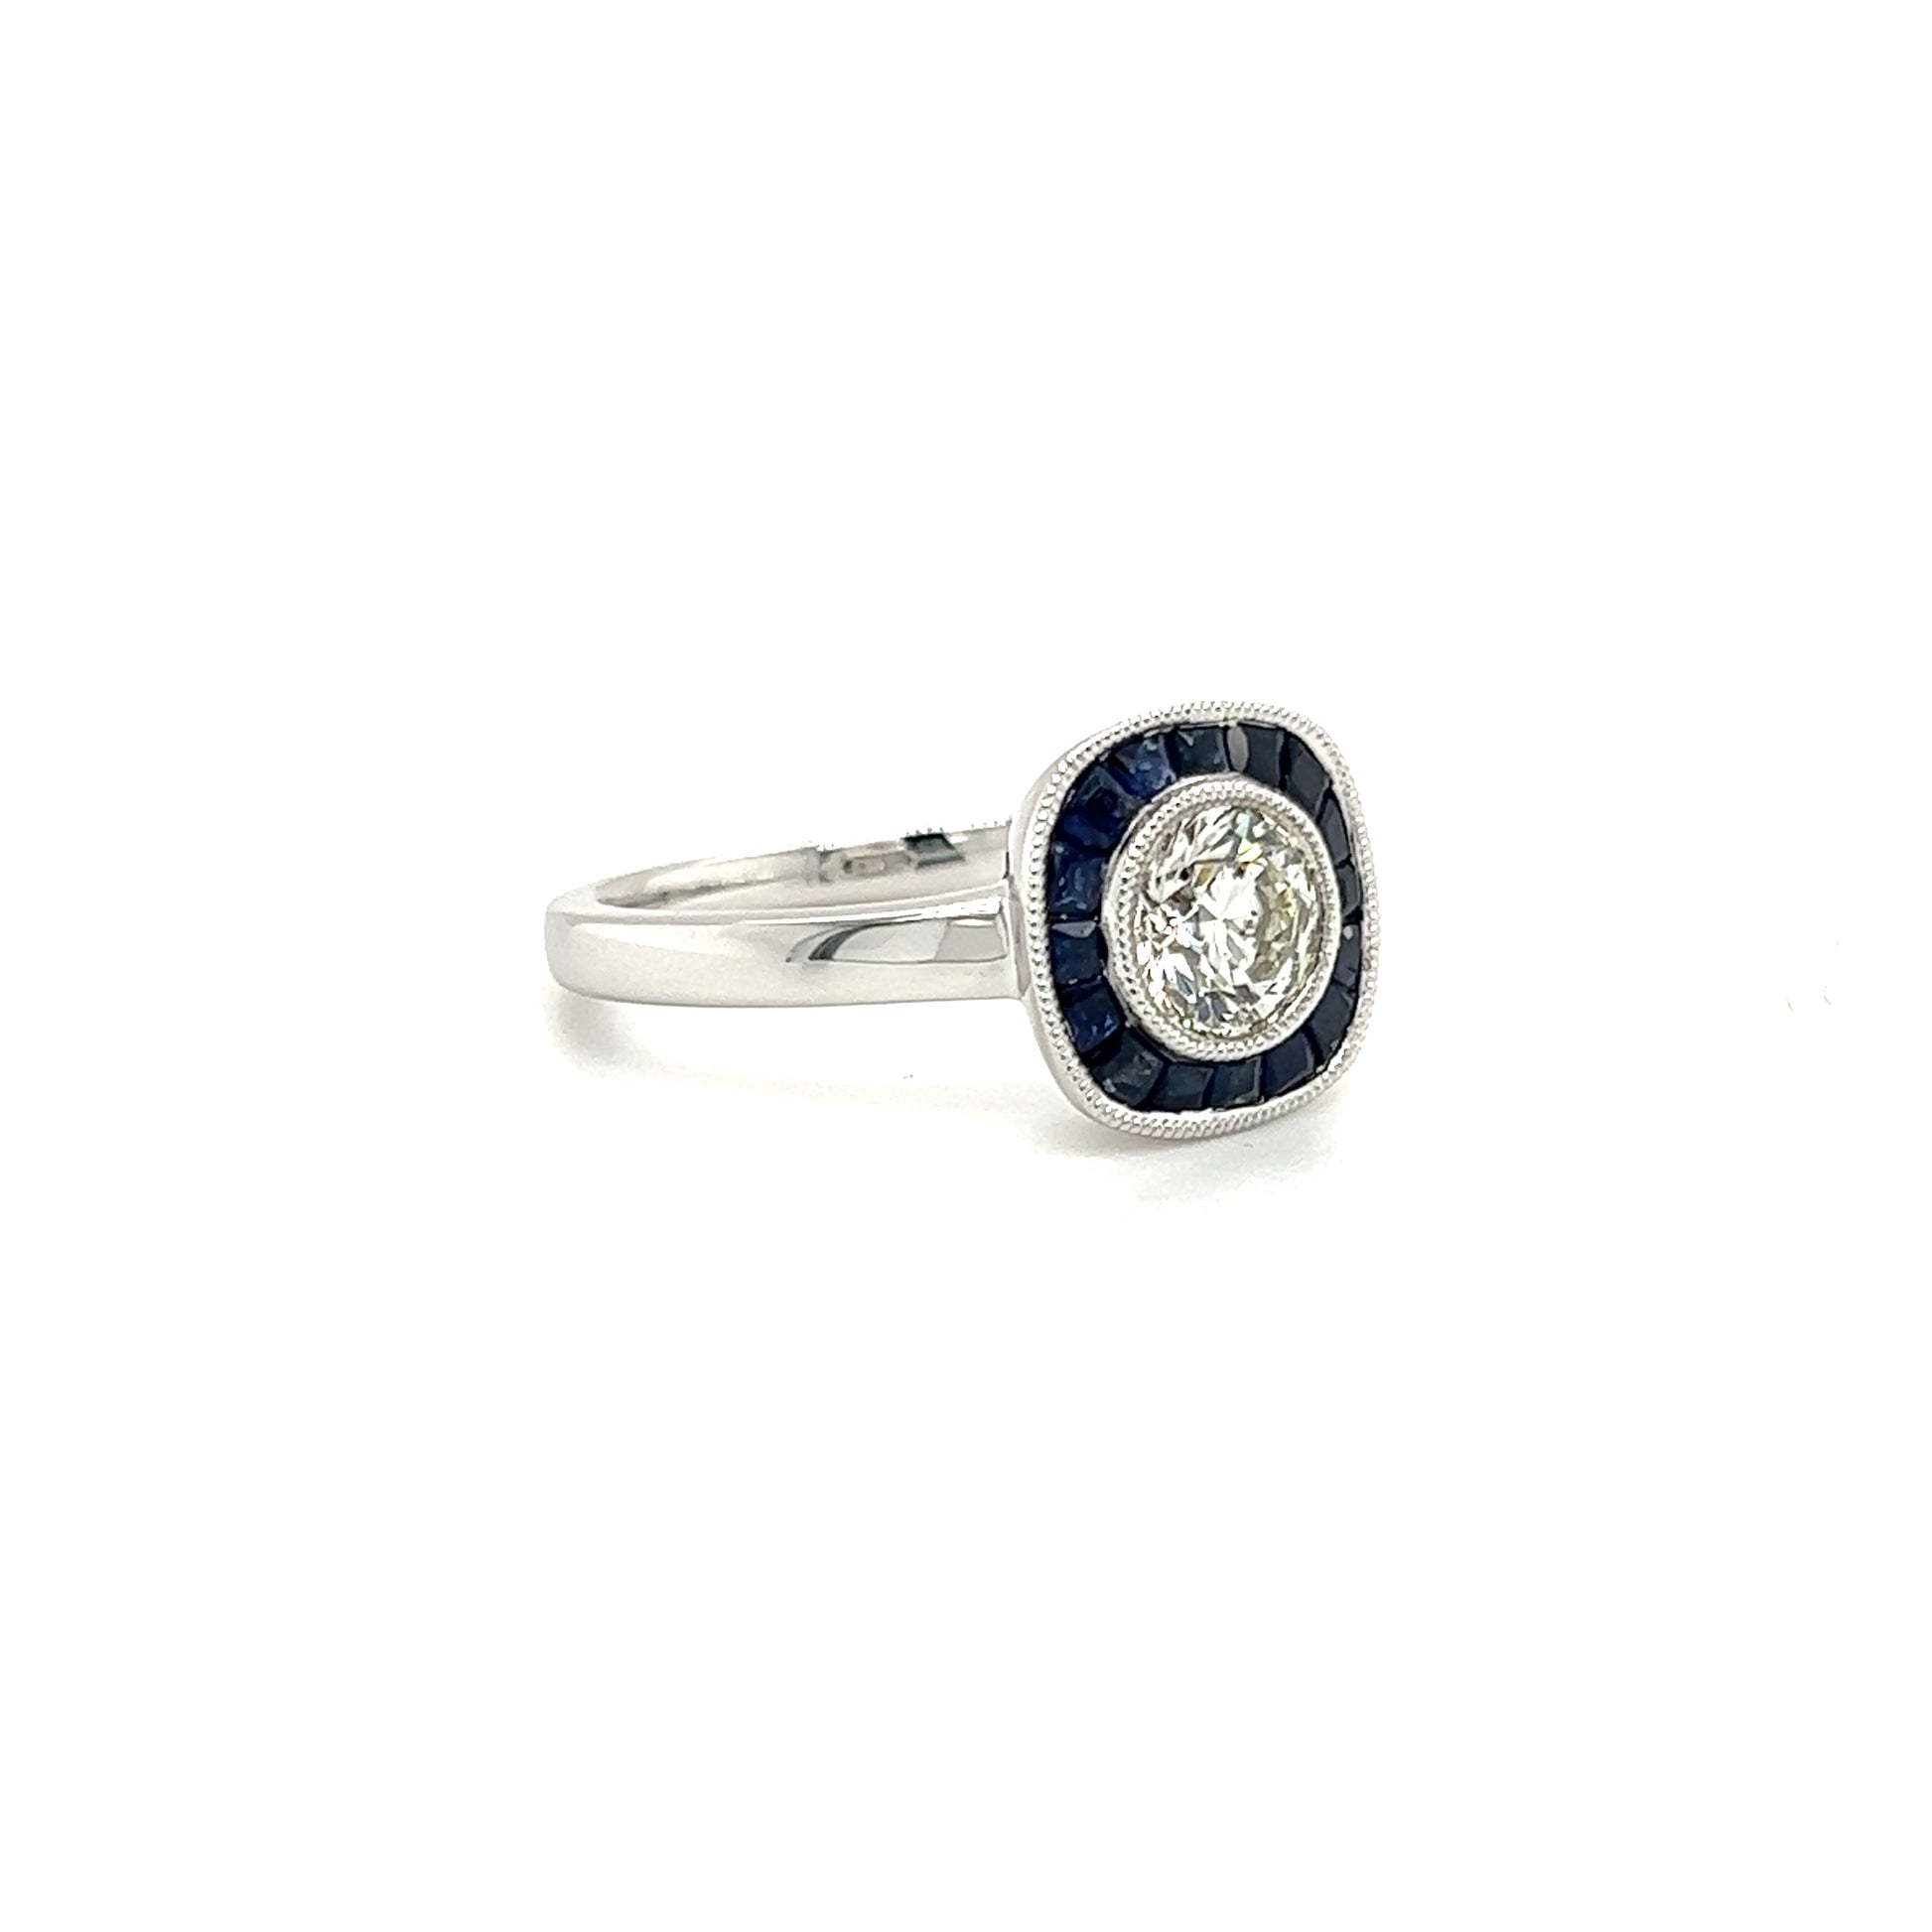 Brilliant Diamond Ring with Sapphire Halo in 18K White Gold Left Side View